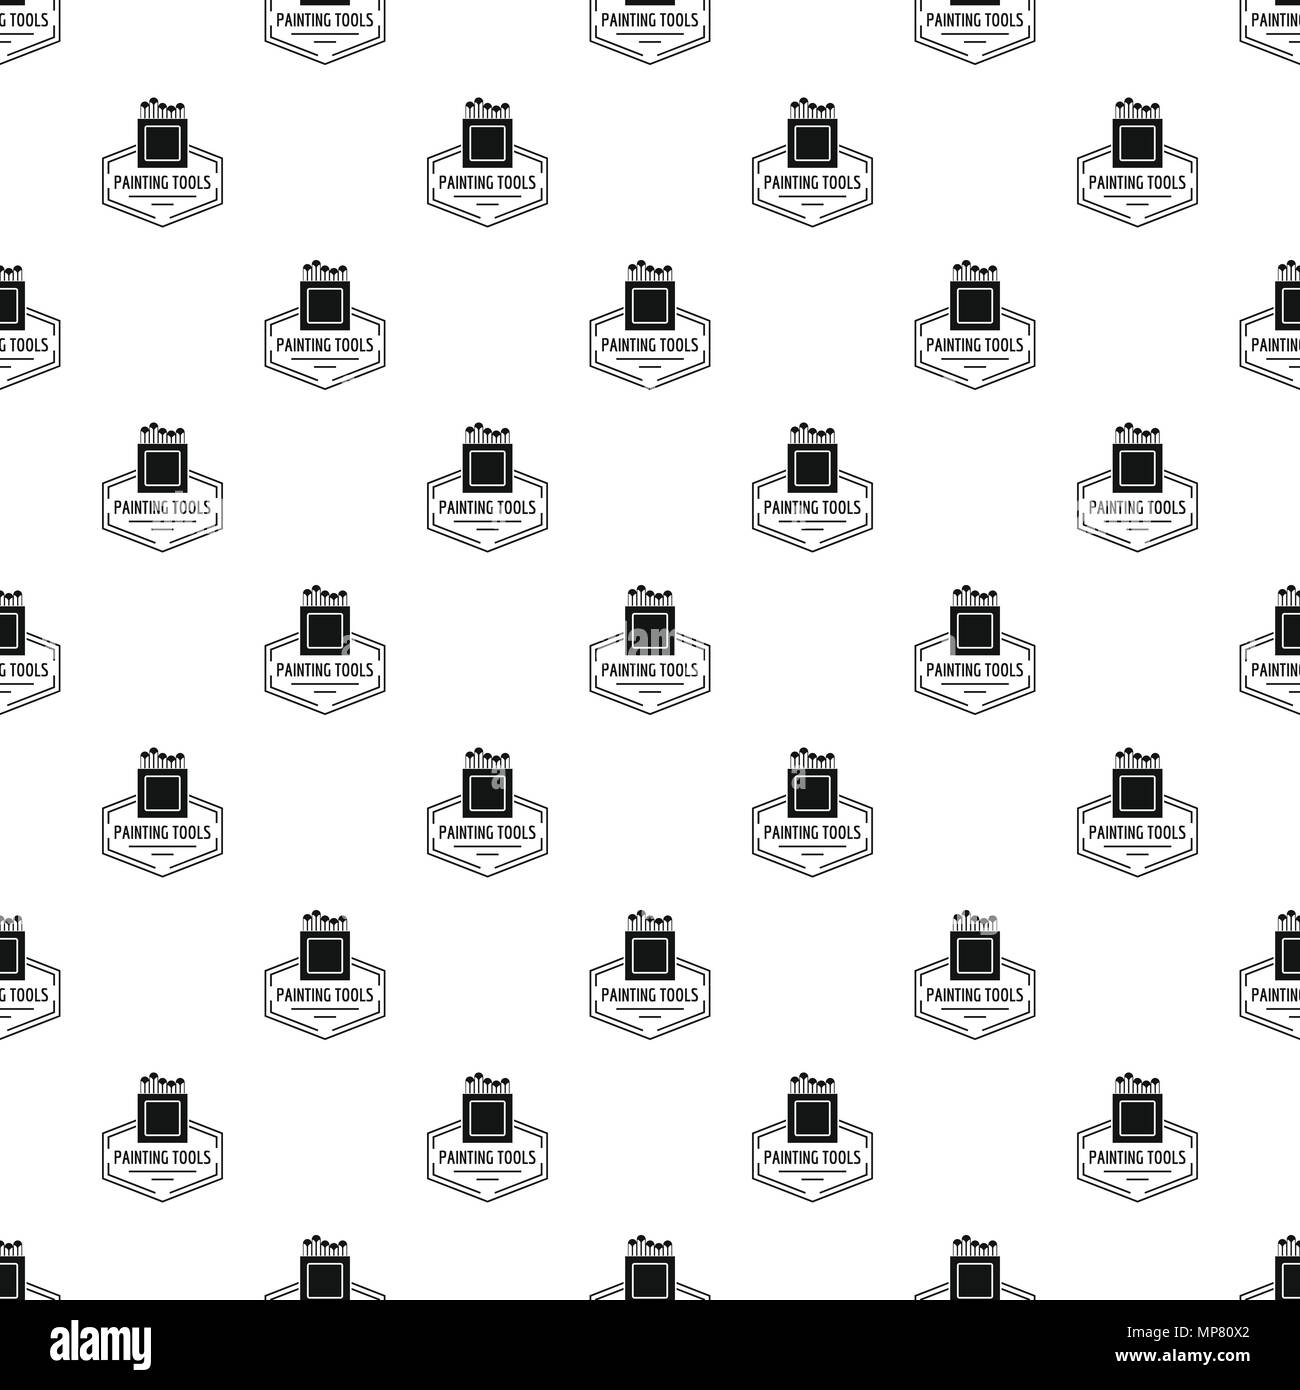 Painting tool pattern vector seamless Stock Vector